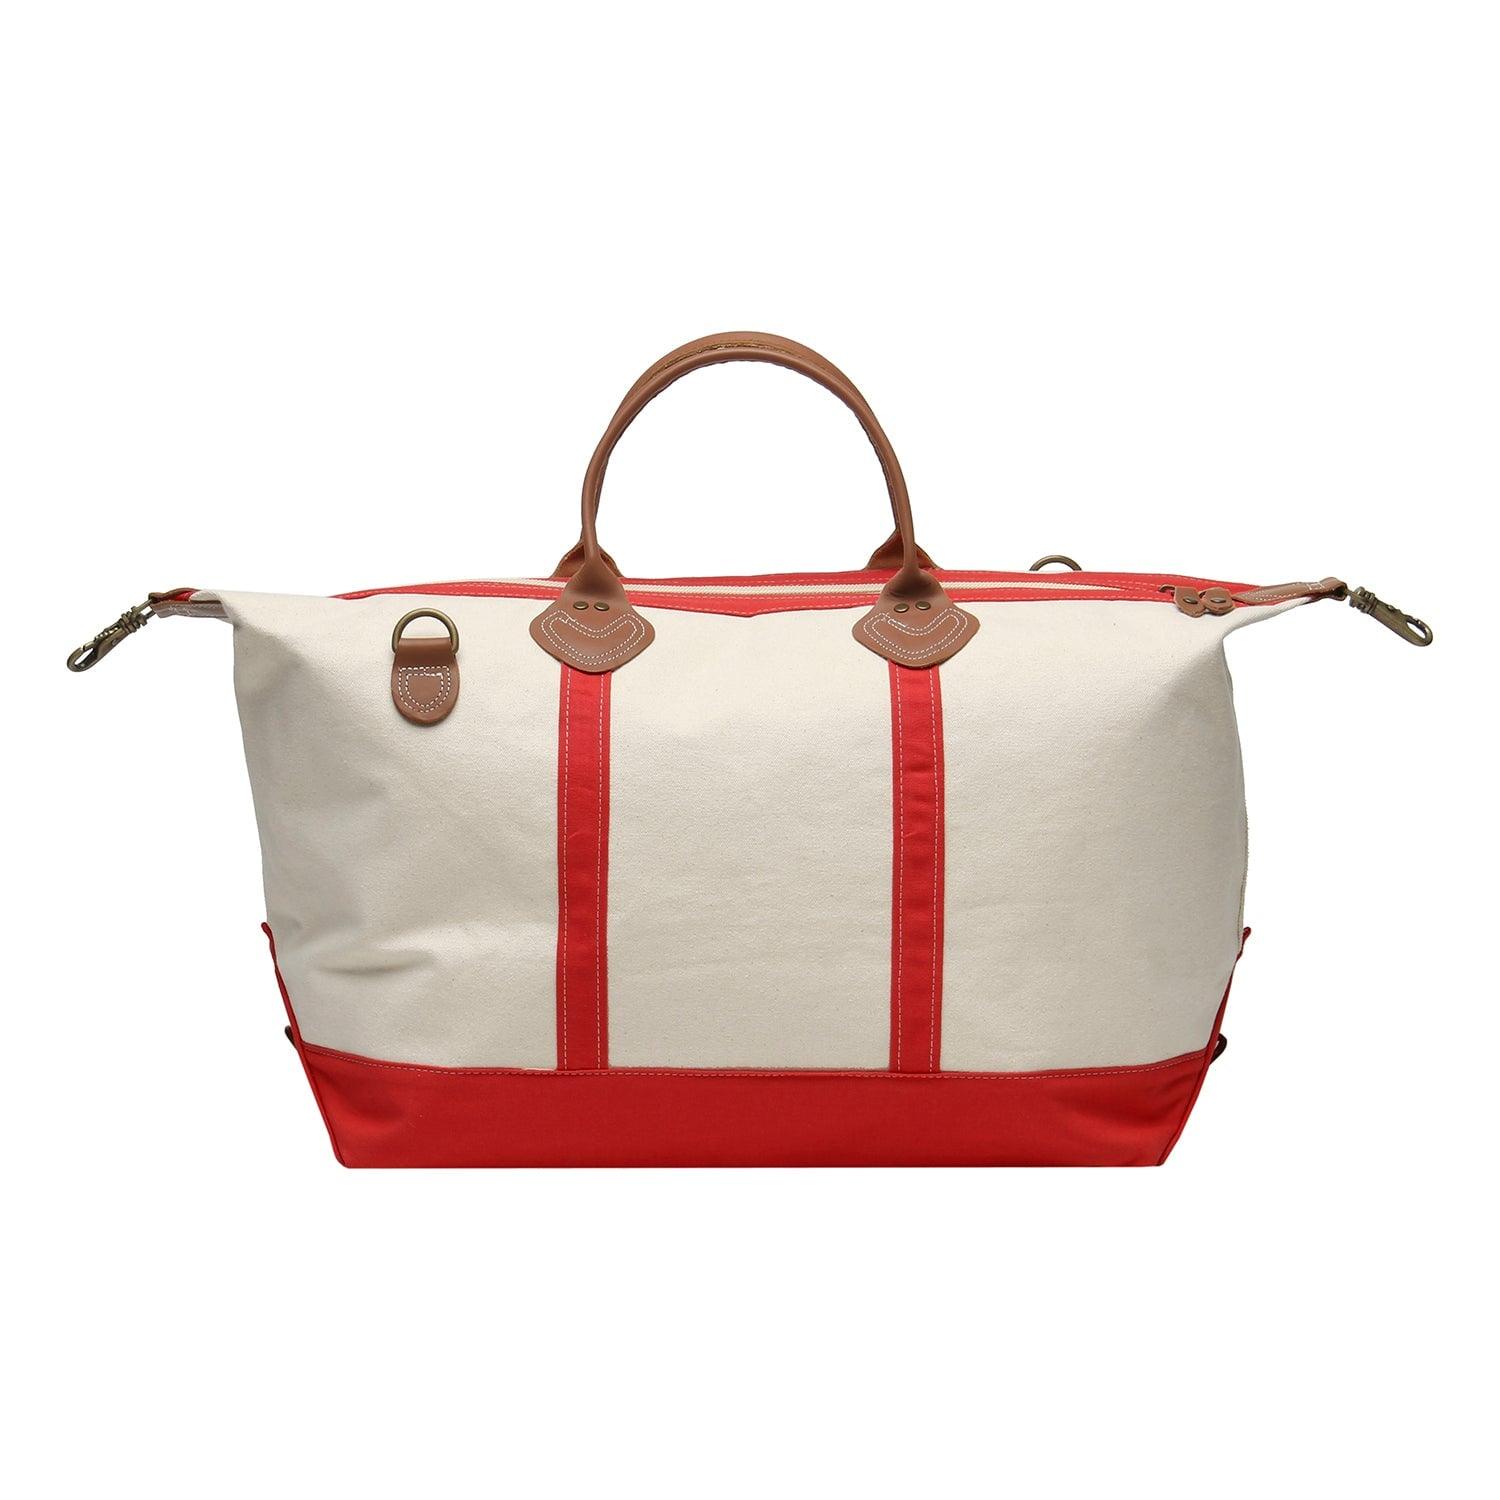 Signature Duffle Bag Clearance Sale Flat 60% Off Duffle & Weekender Tag&Crew Red 